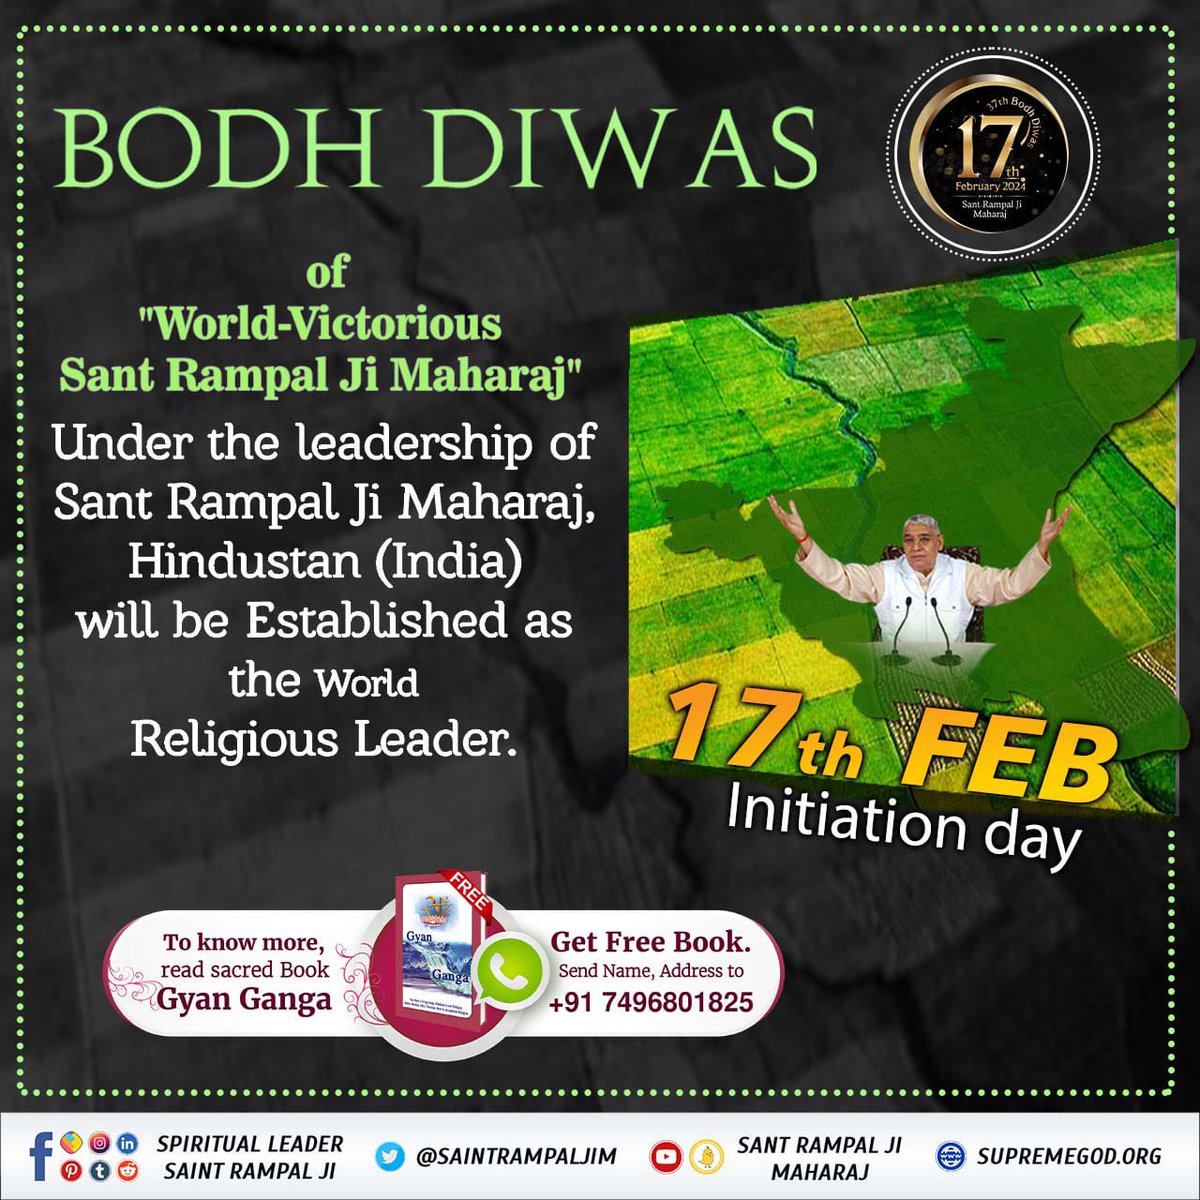 #17Feb_SantRampalJi_BodhDiwas
#17Feb_SantRampalJi_BodhDiwas
One of the most important day for the whole humans is the Bodh Diwas of Sant Rampal Ji Maharaj as it paved the way for the salvation of uncountable persons who are taking Naam Deeksha from Him.
4Days Left For Bodh Diwas